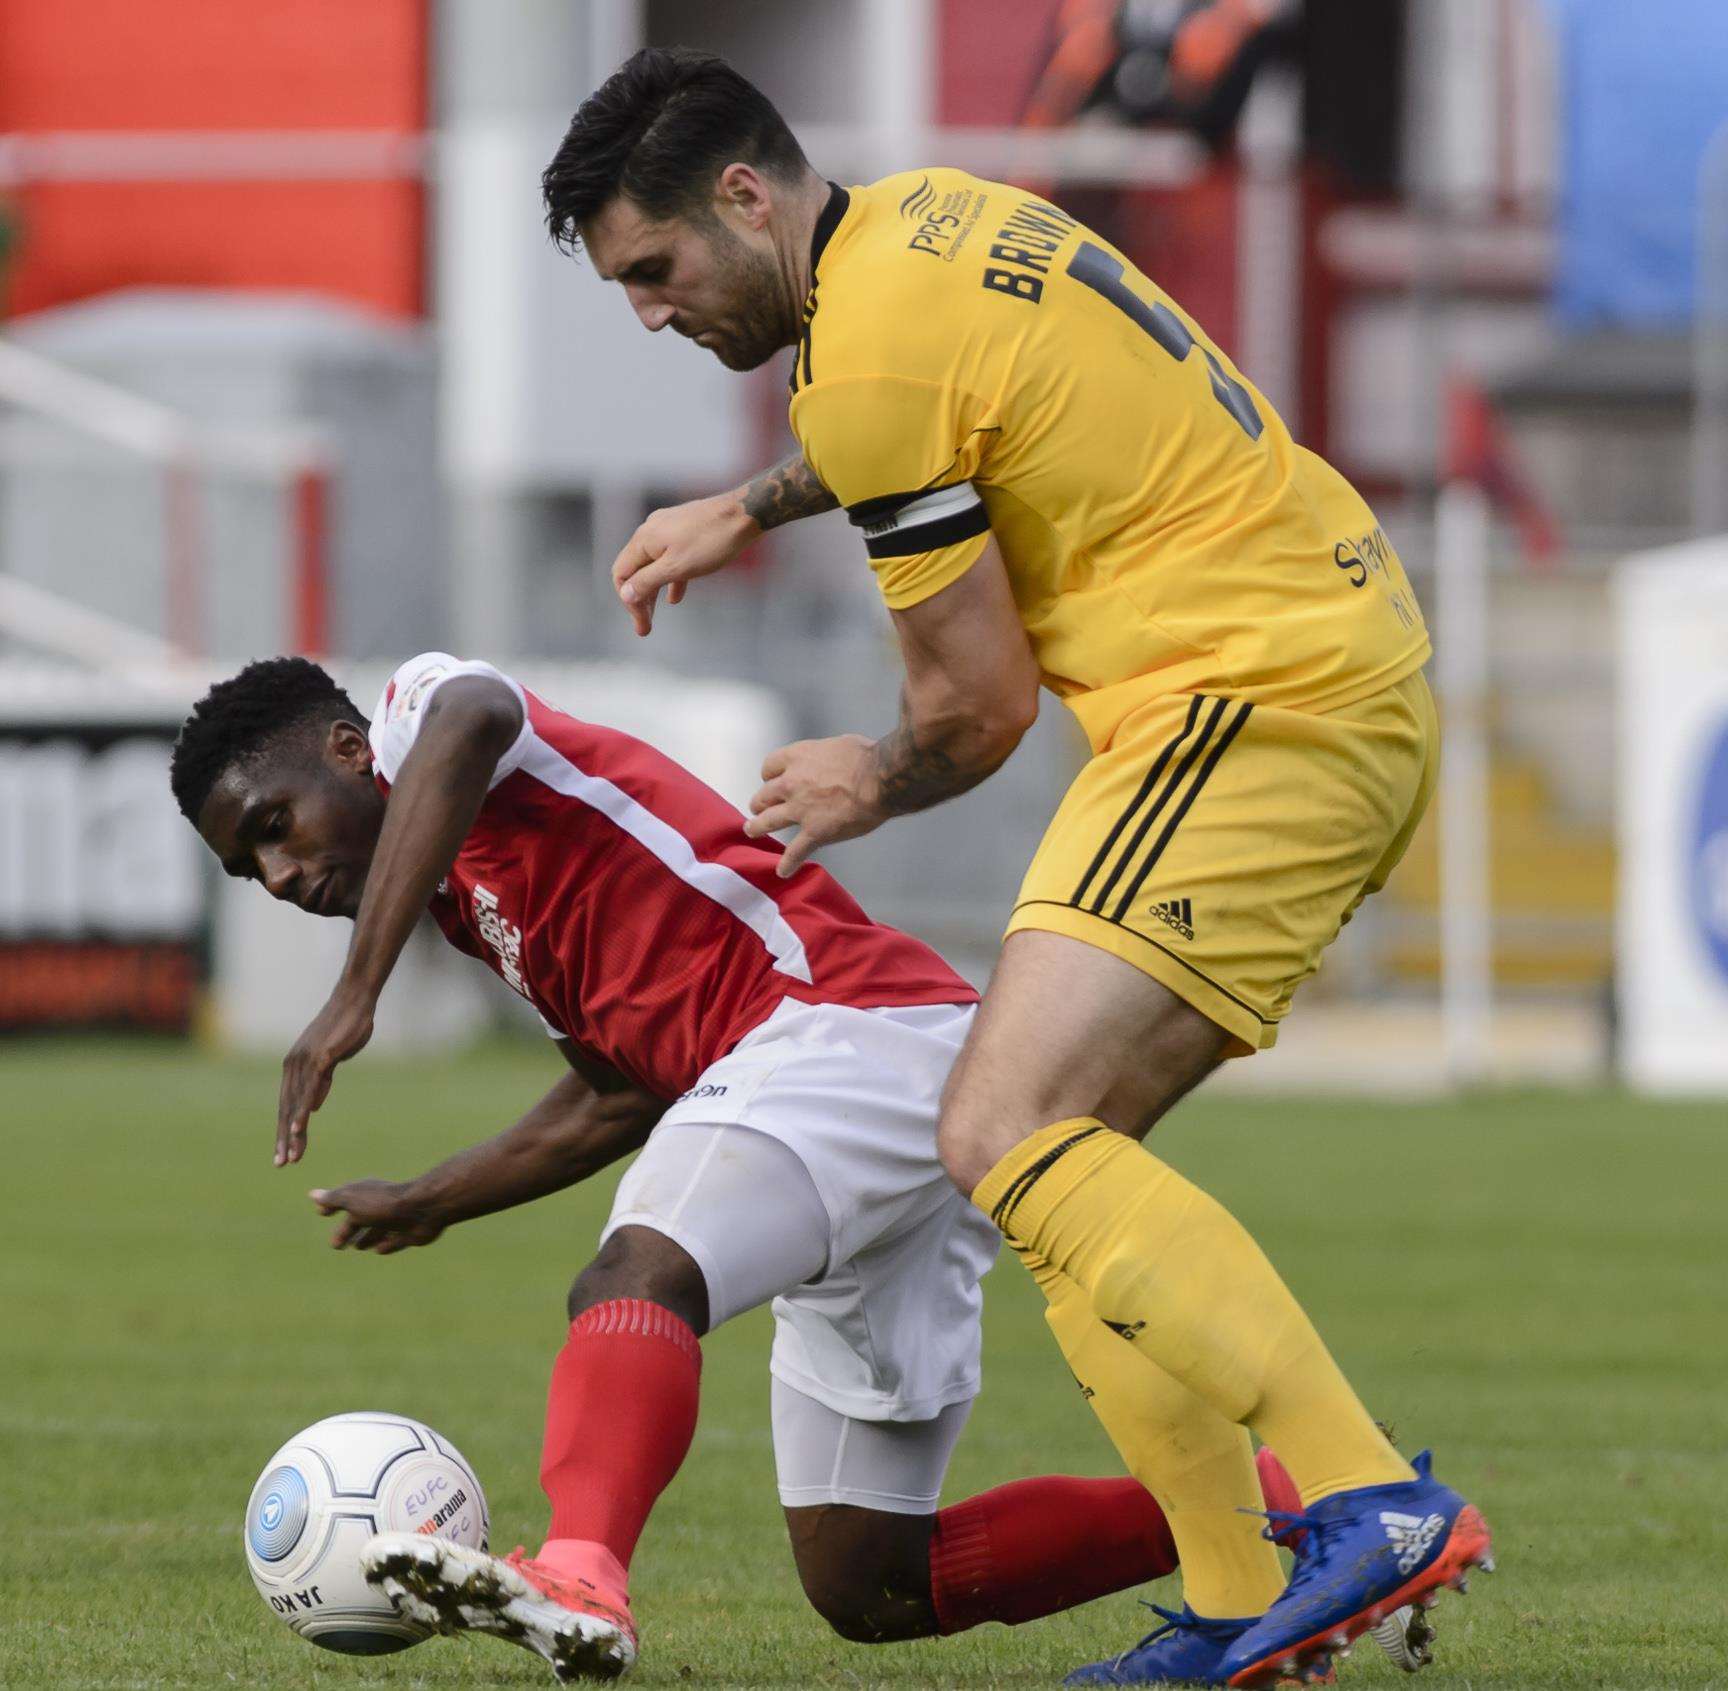 Darren McQueen suffered a meniscus injury in the match against Halifax Town last season Picture: Andy Payton